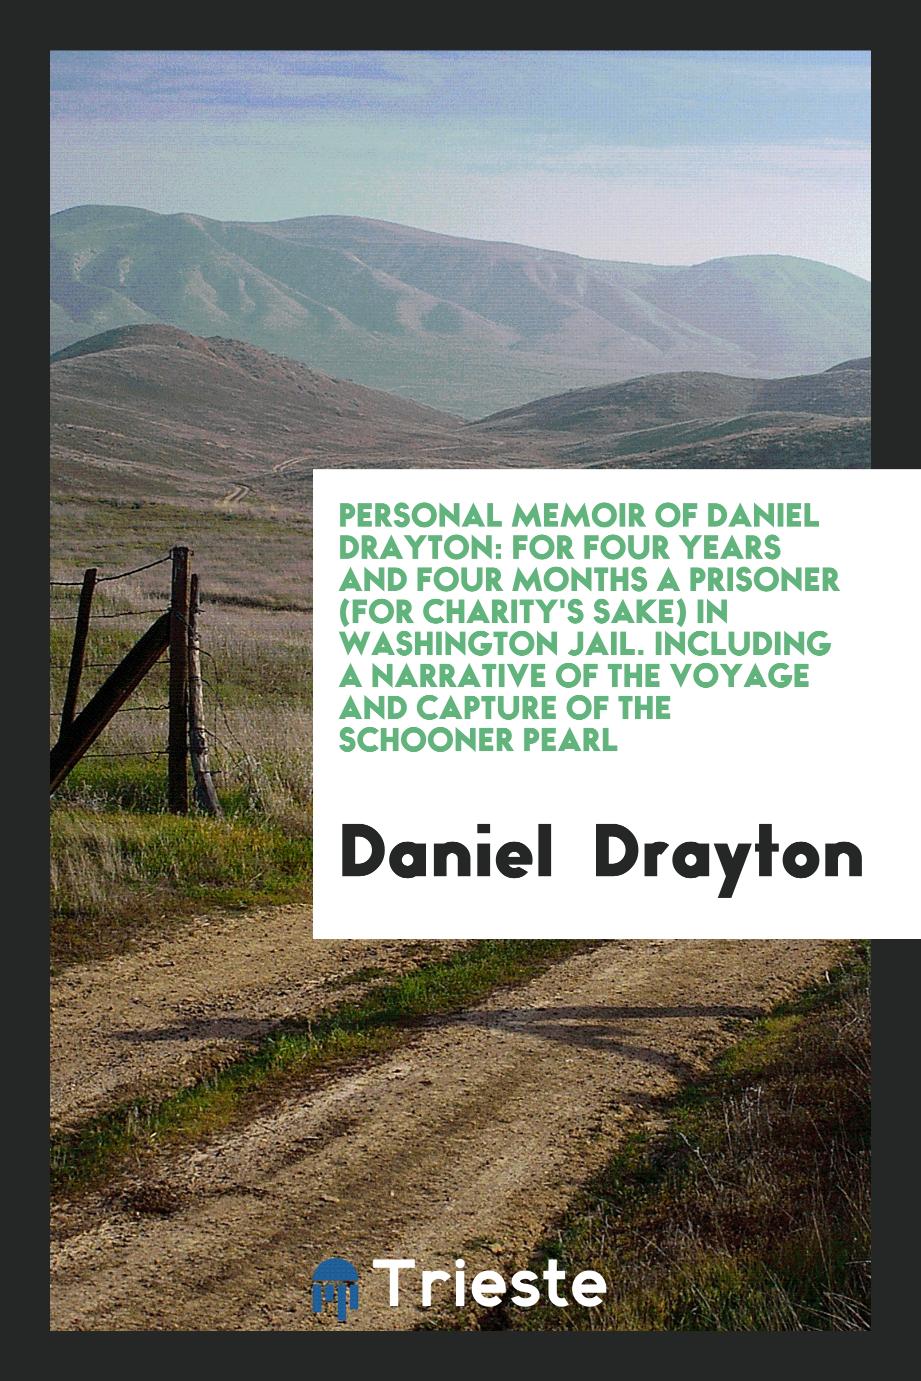 Personal Memoir of Daniel Drayton: For Four Years and Four Months a Prisoner (for Charity's Sake) in Washington Jail. Including a Narrative of the Voyage and Capture of the Schooner Pearl